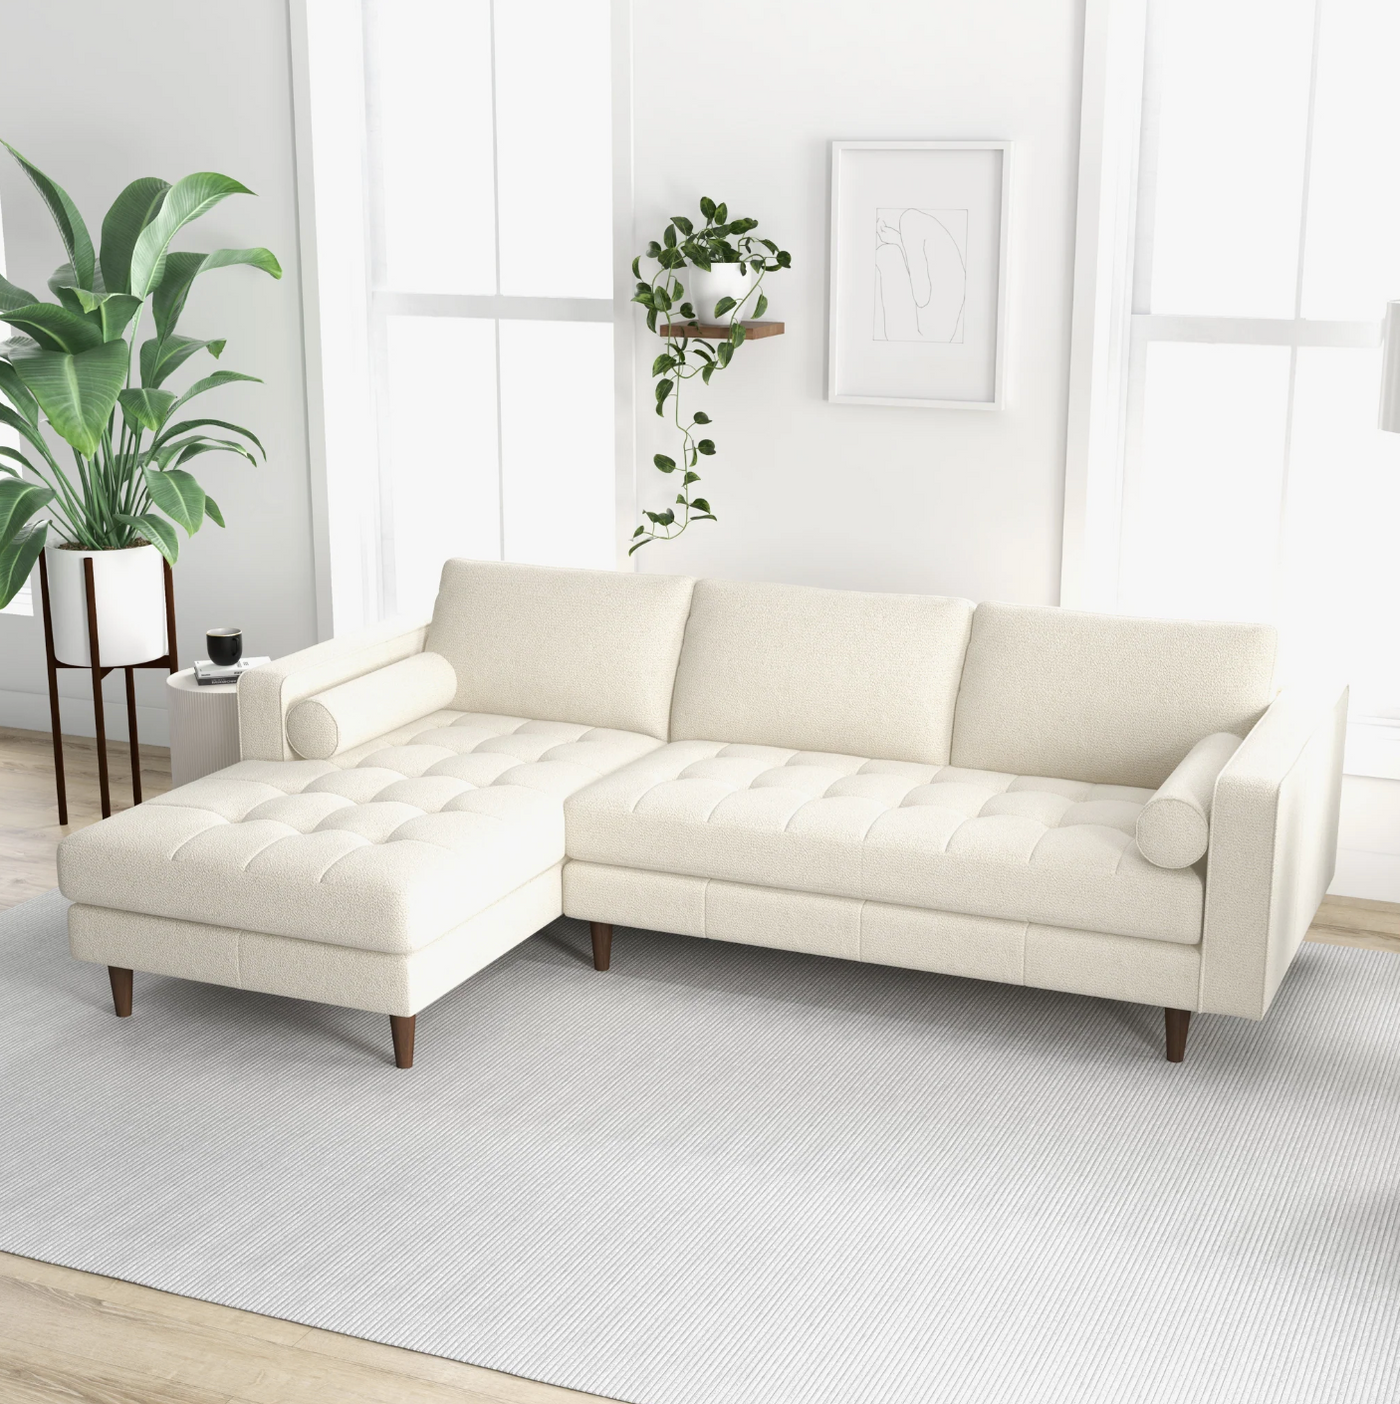 Anthony Tufted Cream Boucle Sectional Sofa - Left Facing Chaise